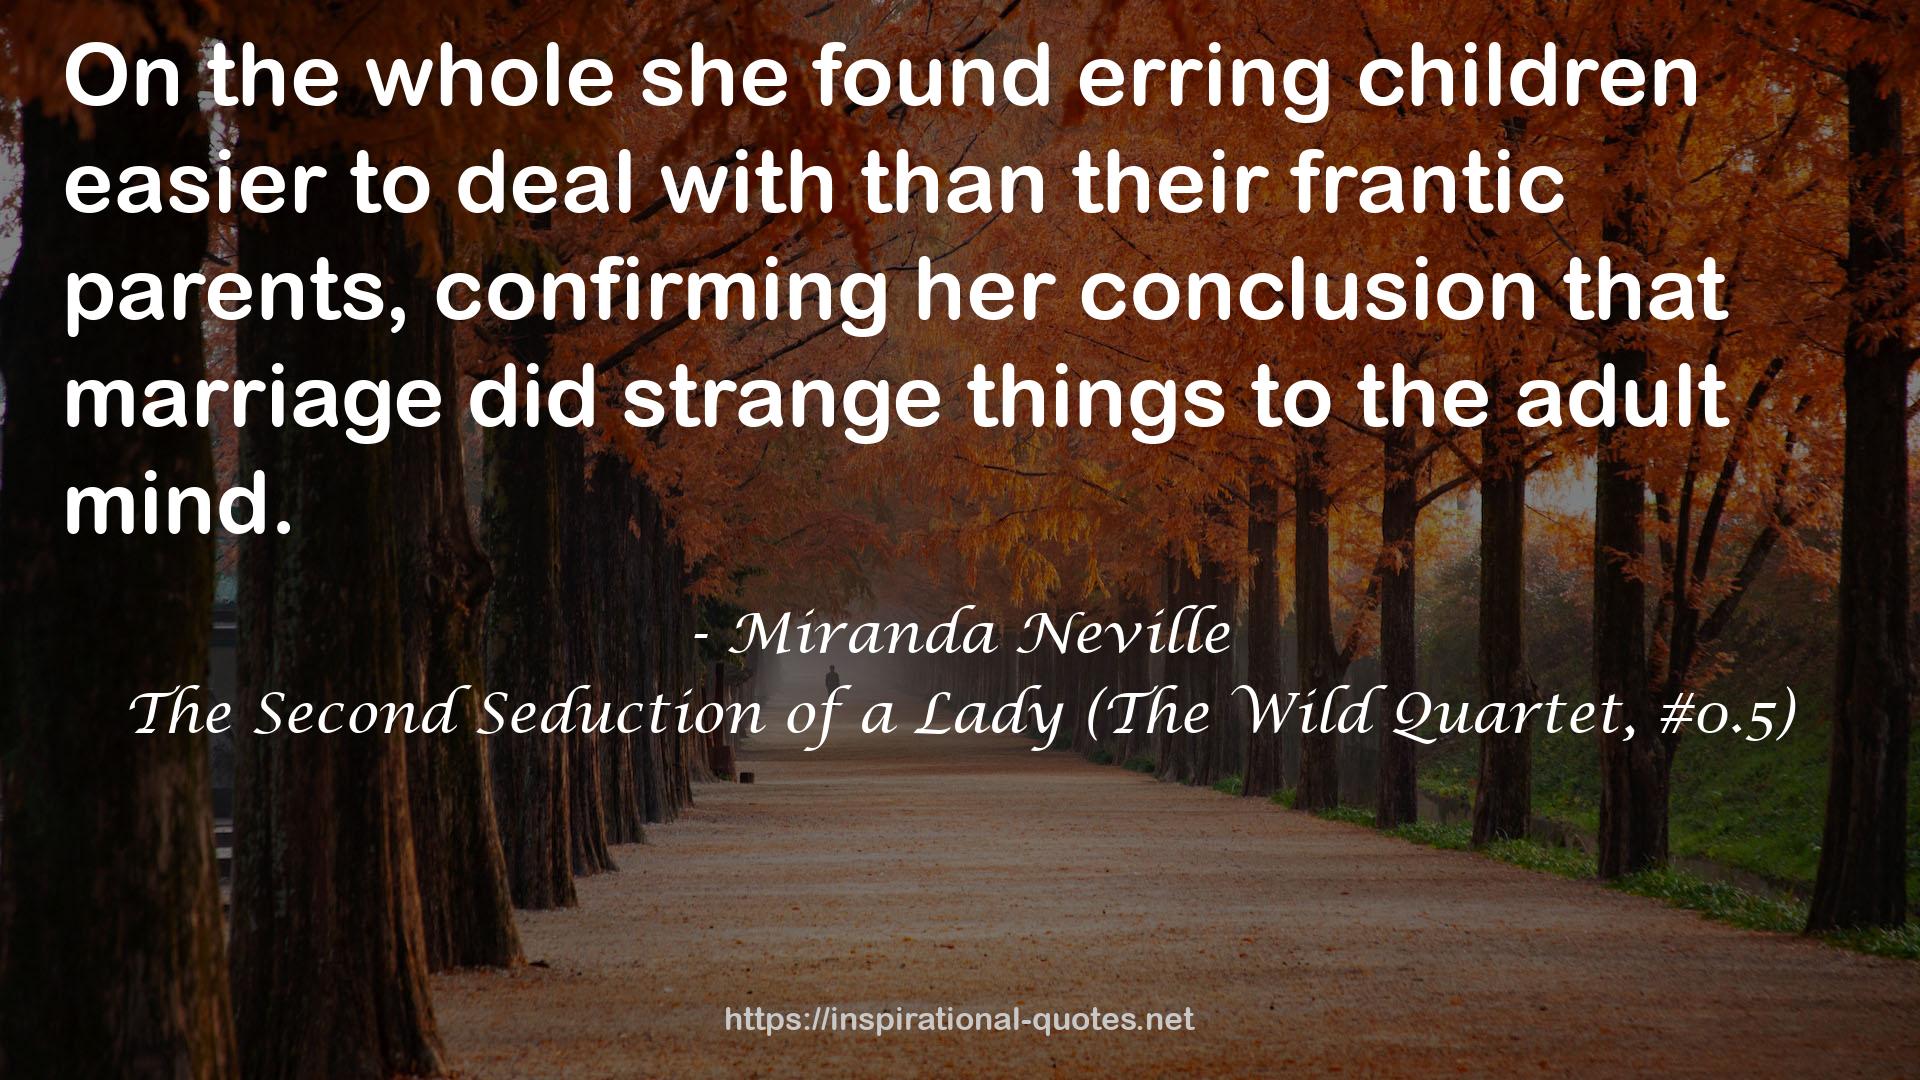 The Second Seduction of a Lady (The Wild Quartet, #0.5) QUOTES